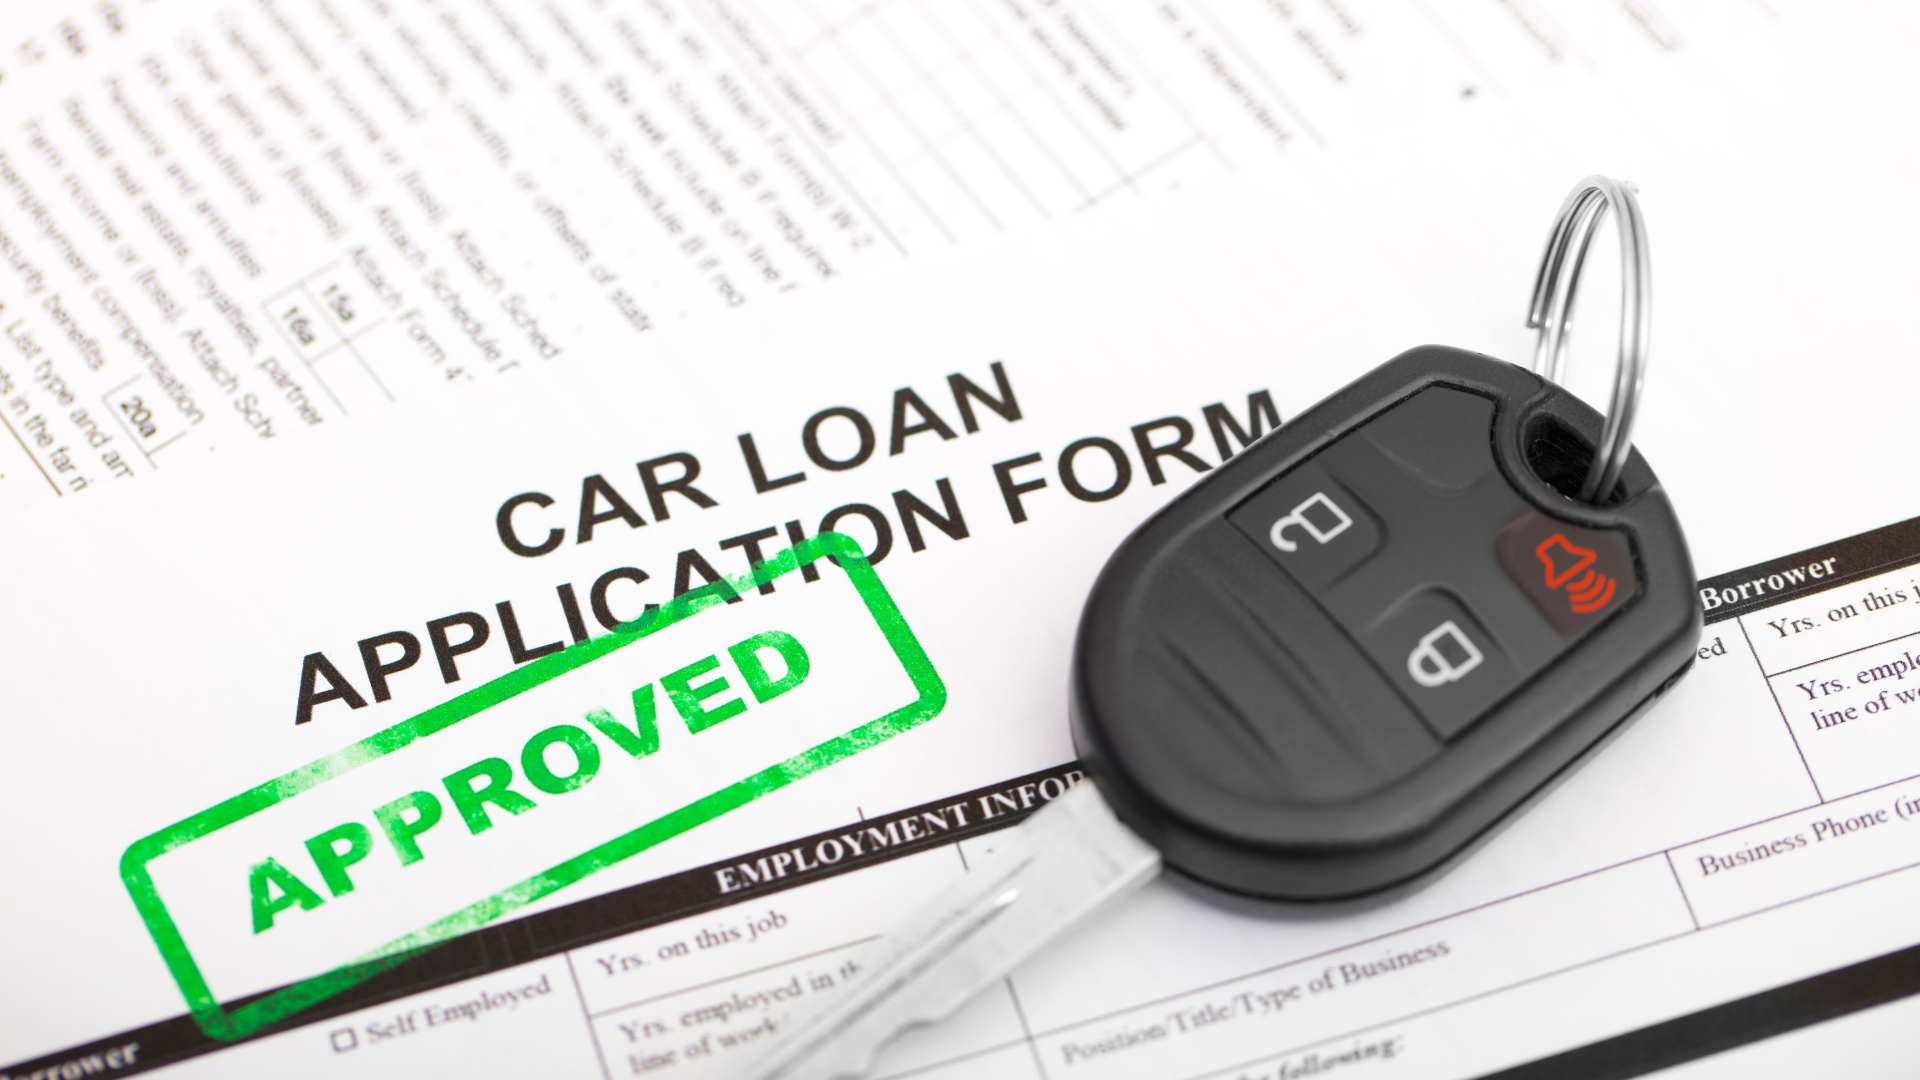 How to Get a Car Loan Without Having Good Credit